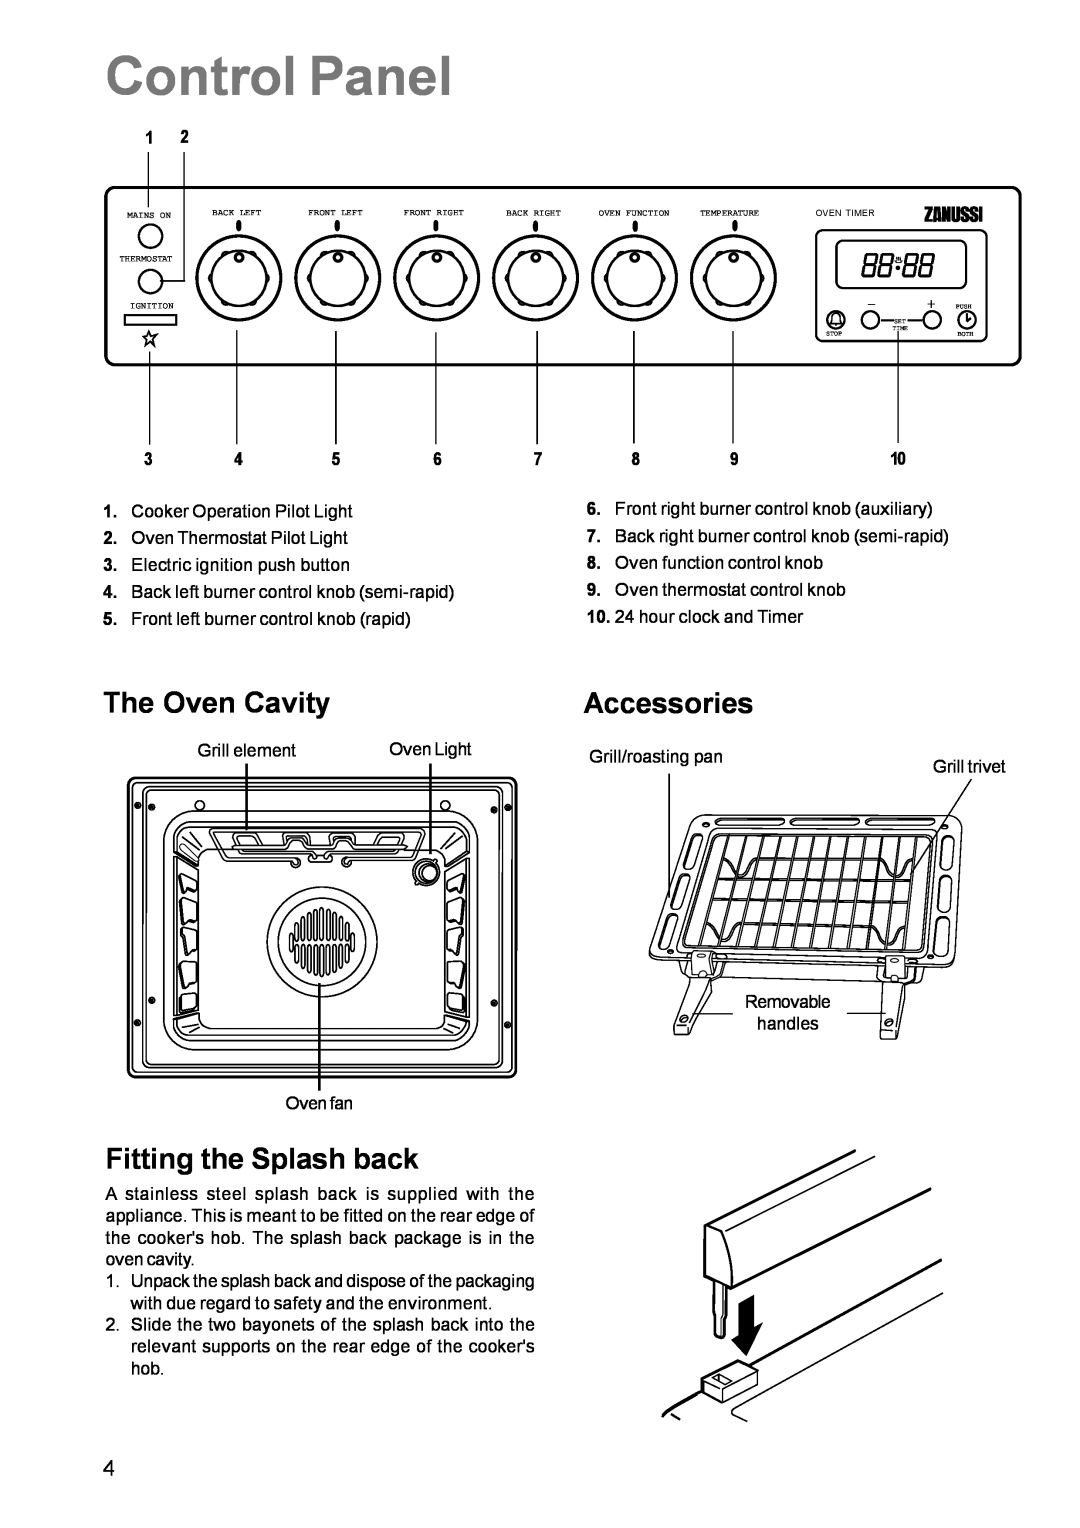 Zanussi ZCM 611 manual Control Panel, The Oven Cavity, Fitting the Splash back, Accessories 